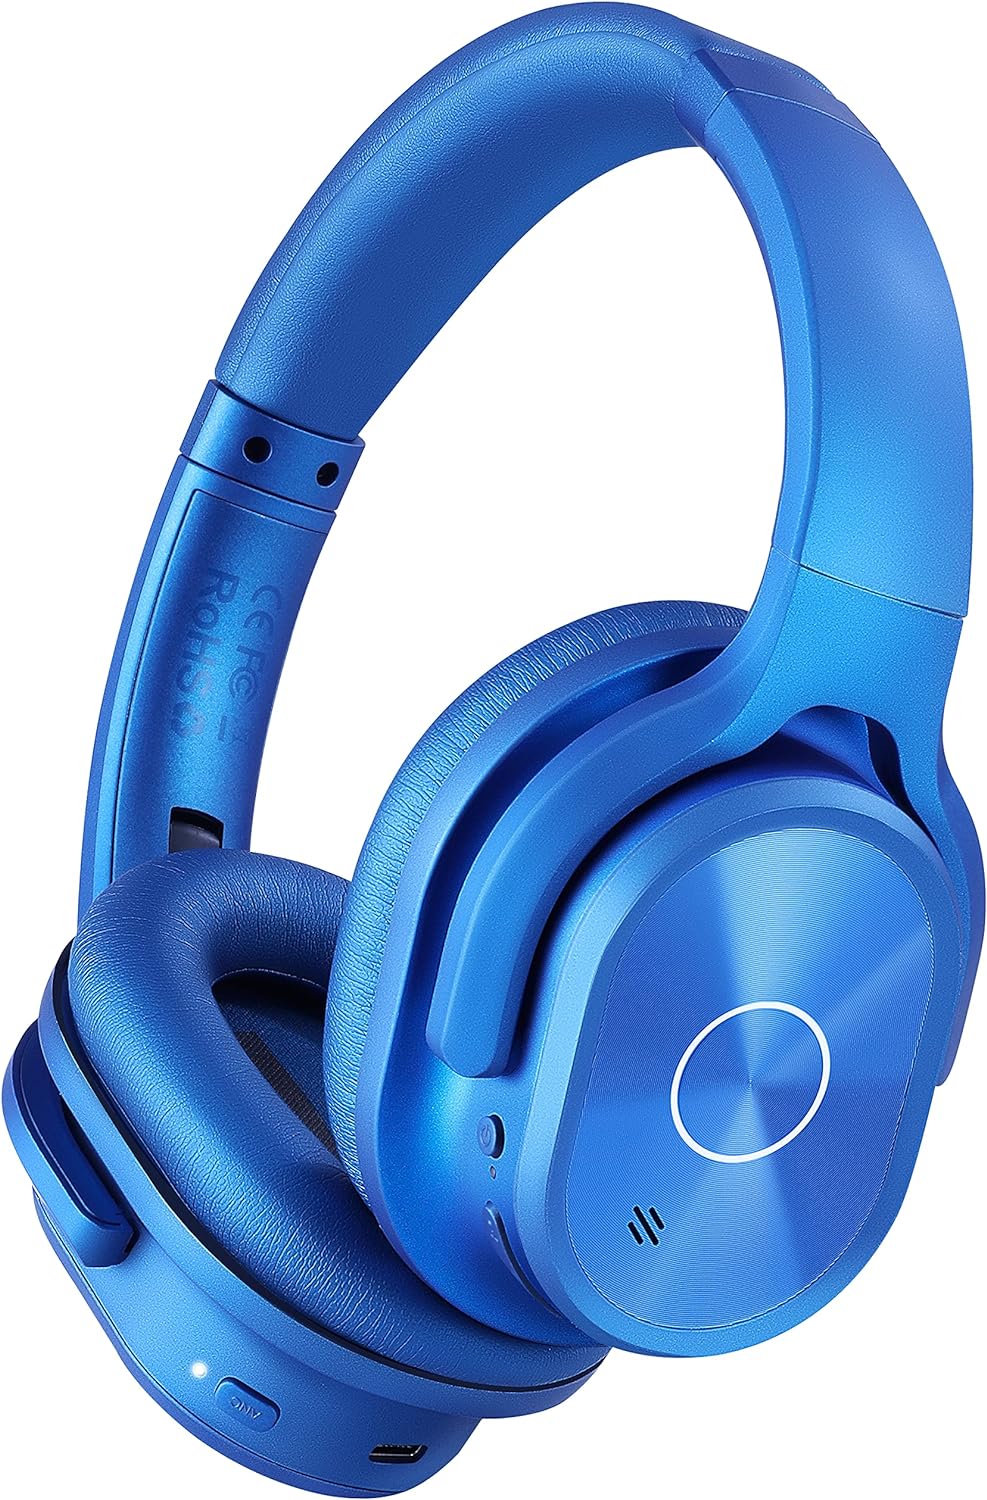 ZIHNIC Active Noise Cancelling Headphones, 40H Playtime Wireless Bluetooth Headset with Deep Bass Hi-Fi Stereo Sound,Over-Ear Headphone,Comfortable Earpads for Travel/Home/Office (Blue)